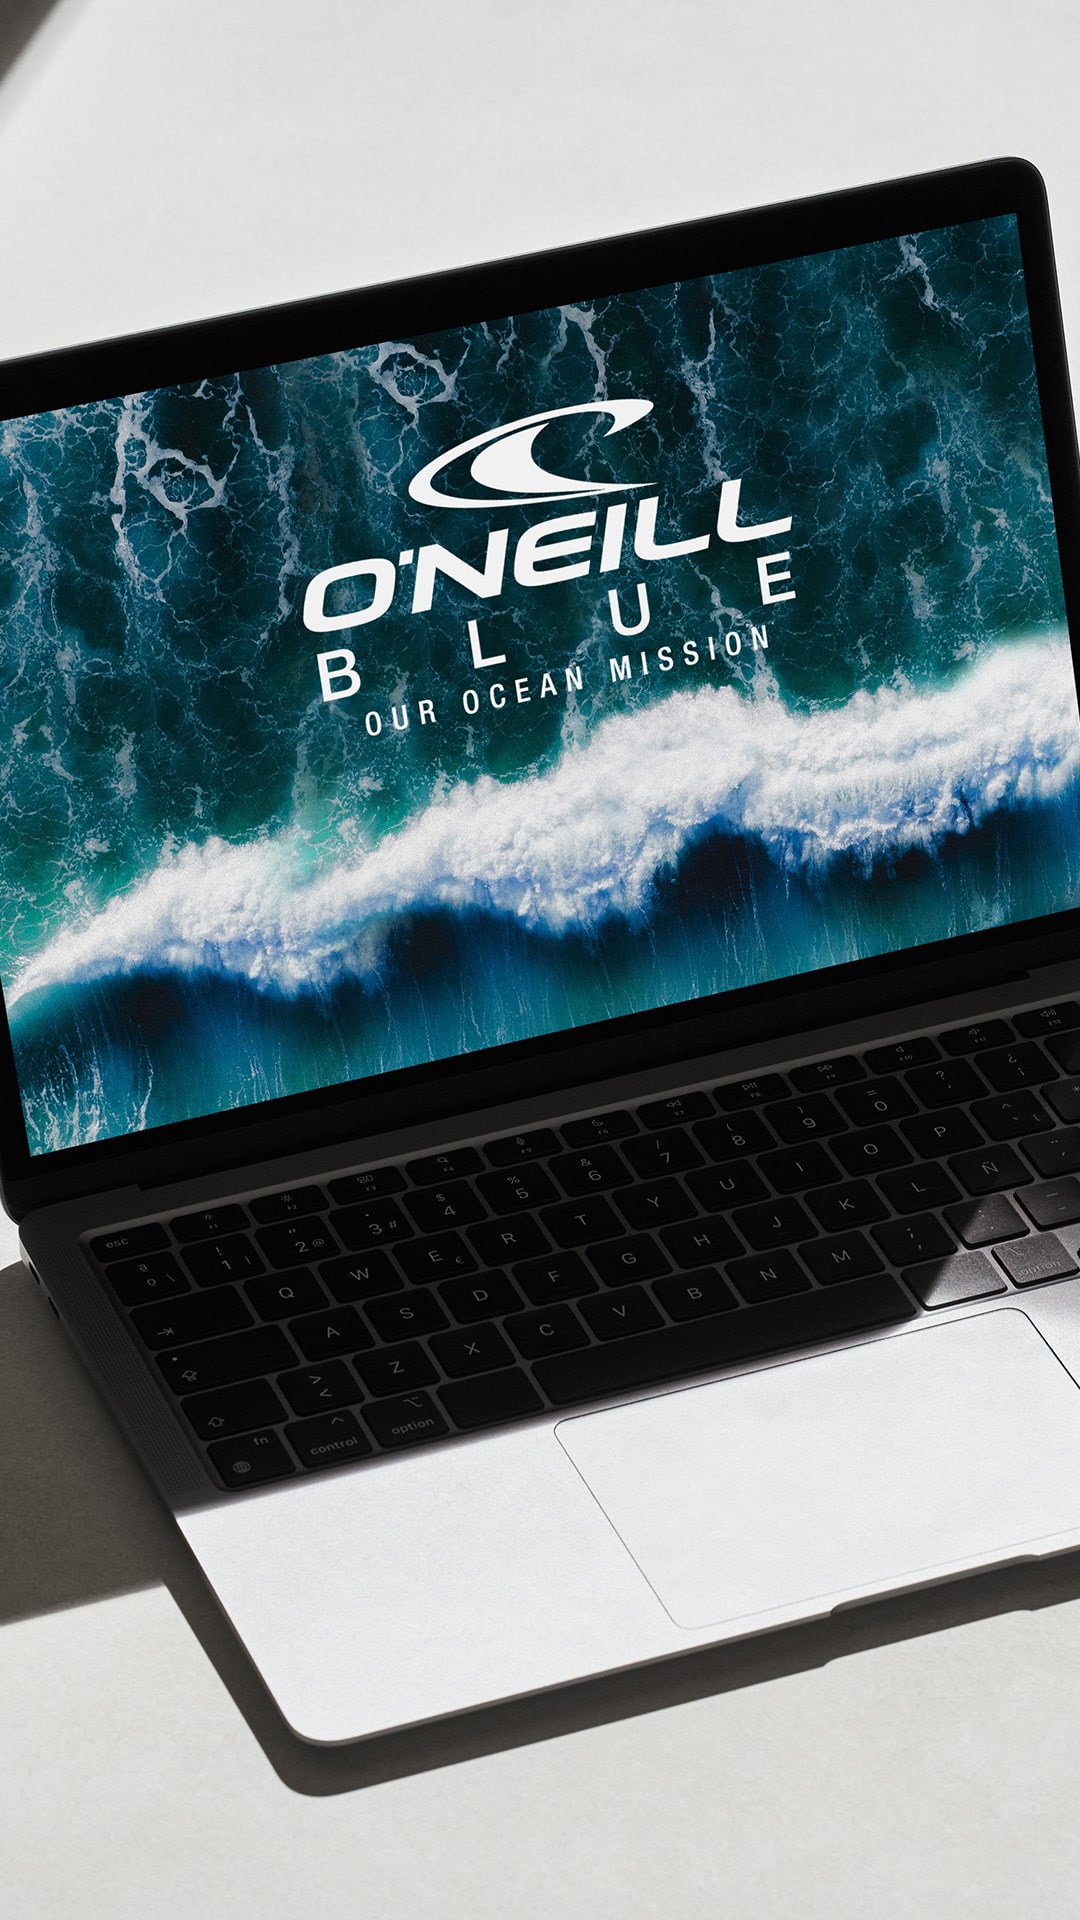 O'NEILL BLUE - OUR OCEAN MISSION